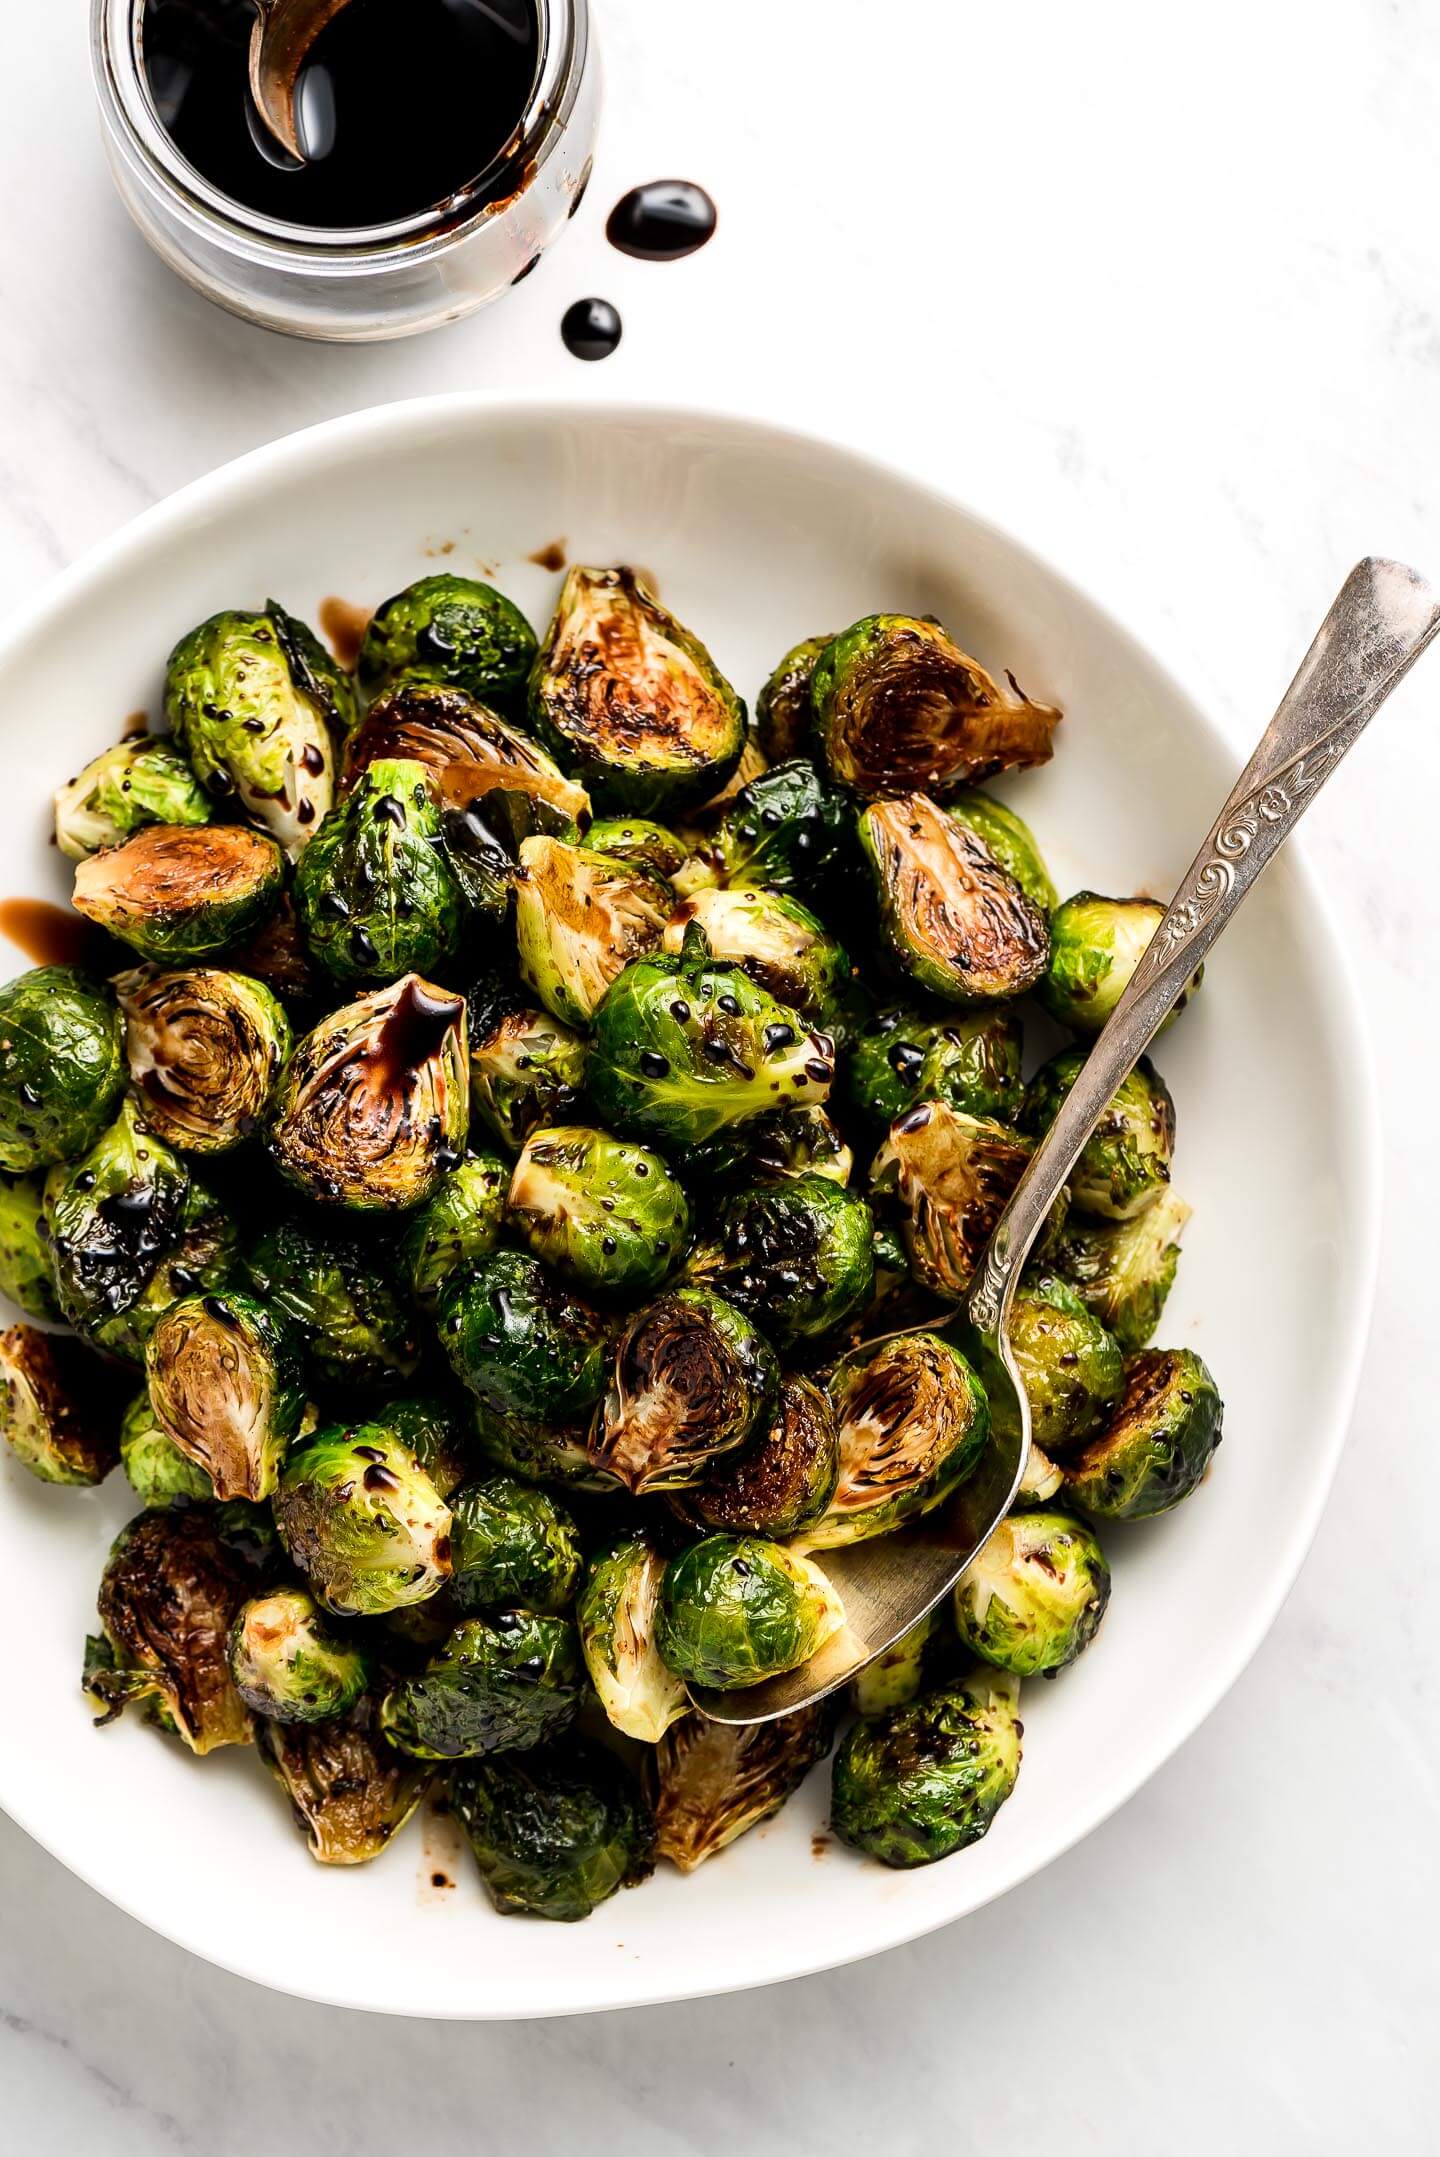 Roasted Brussels Sprouts with Balsamic Glaze - Garnish & Glaze